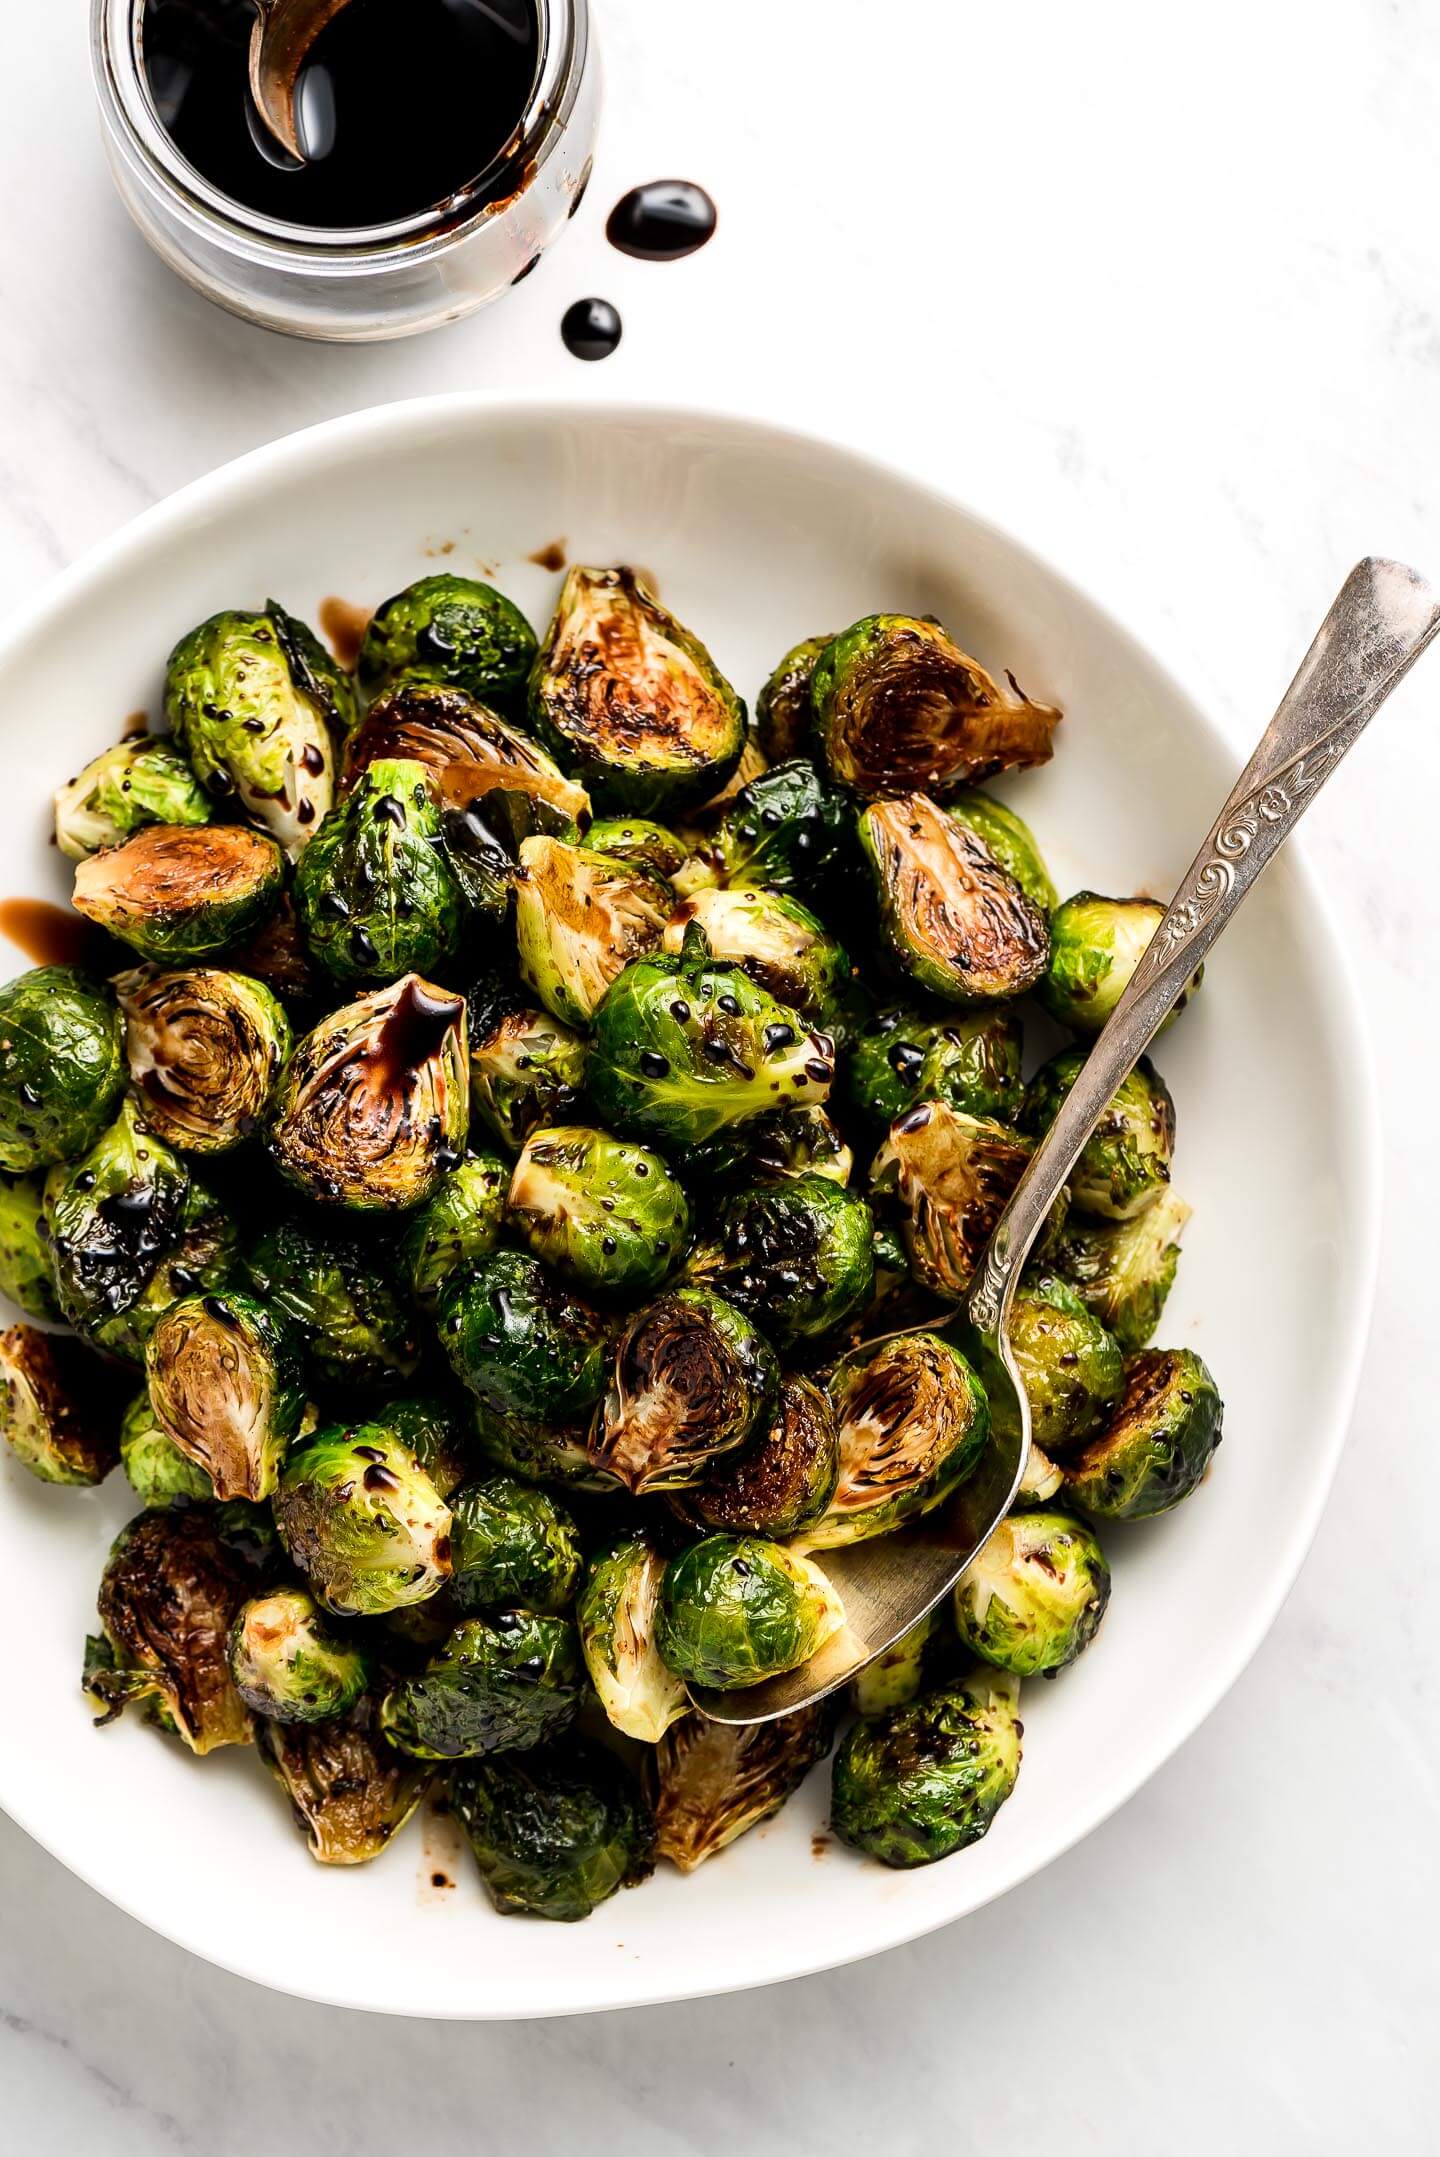 Roasted Brussels Sprouts with Balsamic Glaze - Garnish & Glaze